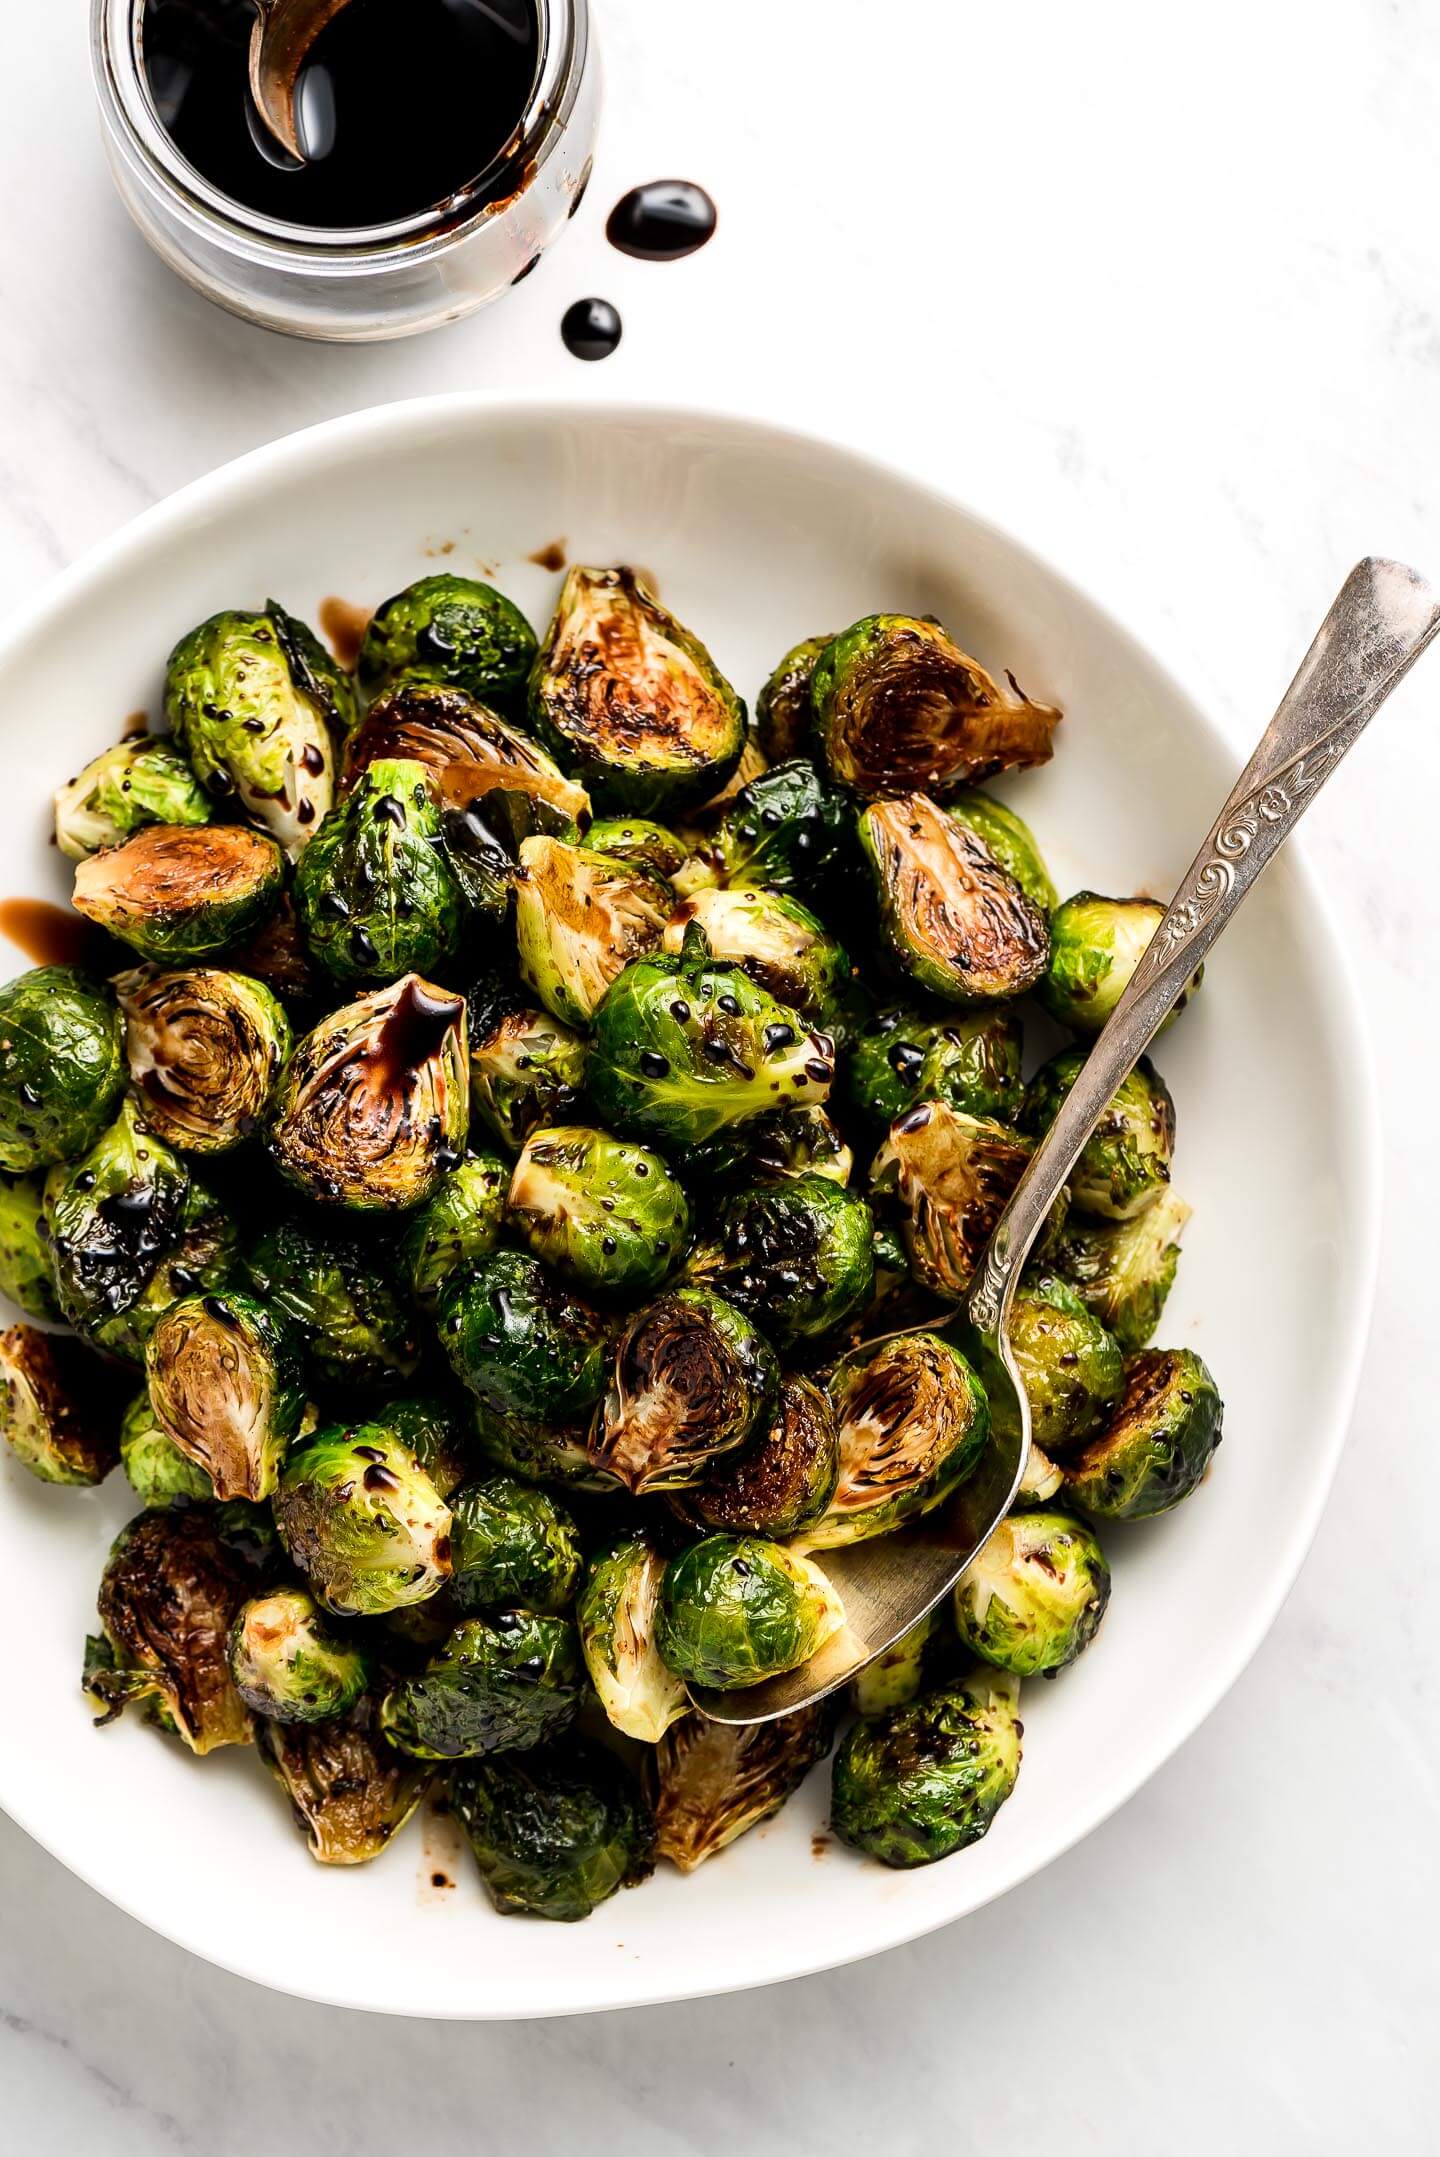 Roasted Brussels Sprouts with Balsamic Glaze - Garnish & Glaze